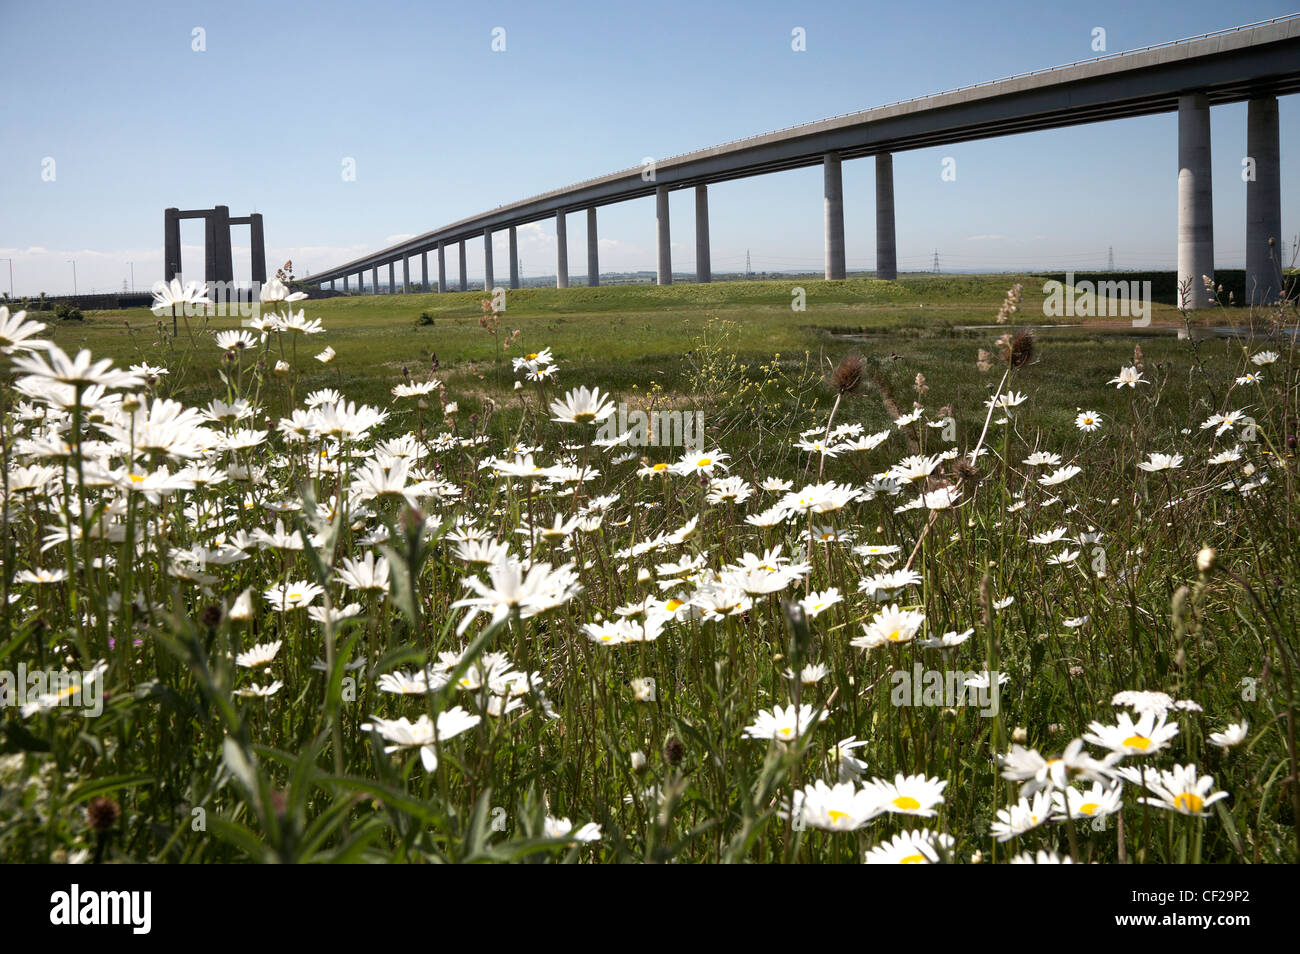 The Sheppey Crossing opened in 2006 over the River Swale, connecting the Isle of Sheppey in the Thames Estuary to mainland Kent. Stock Photo